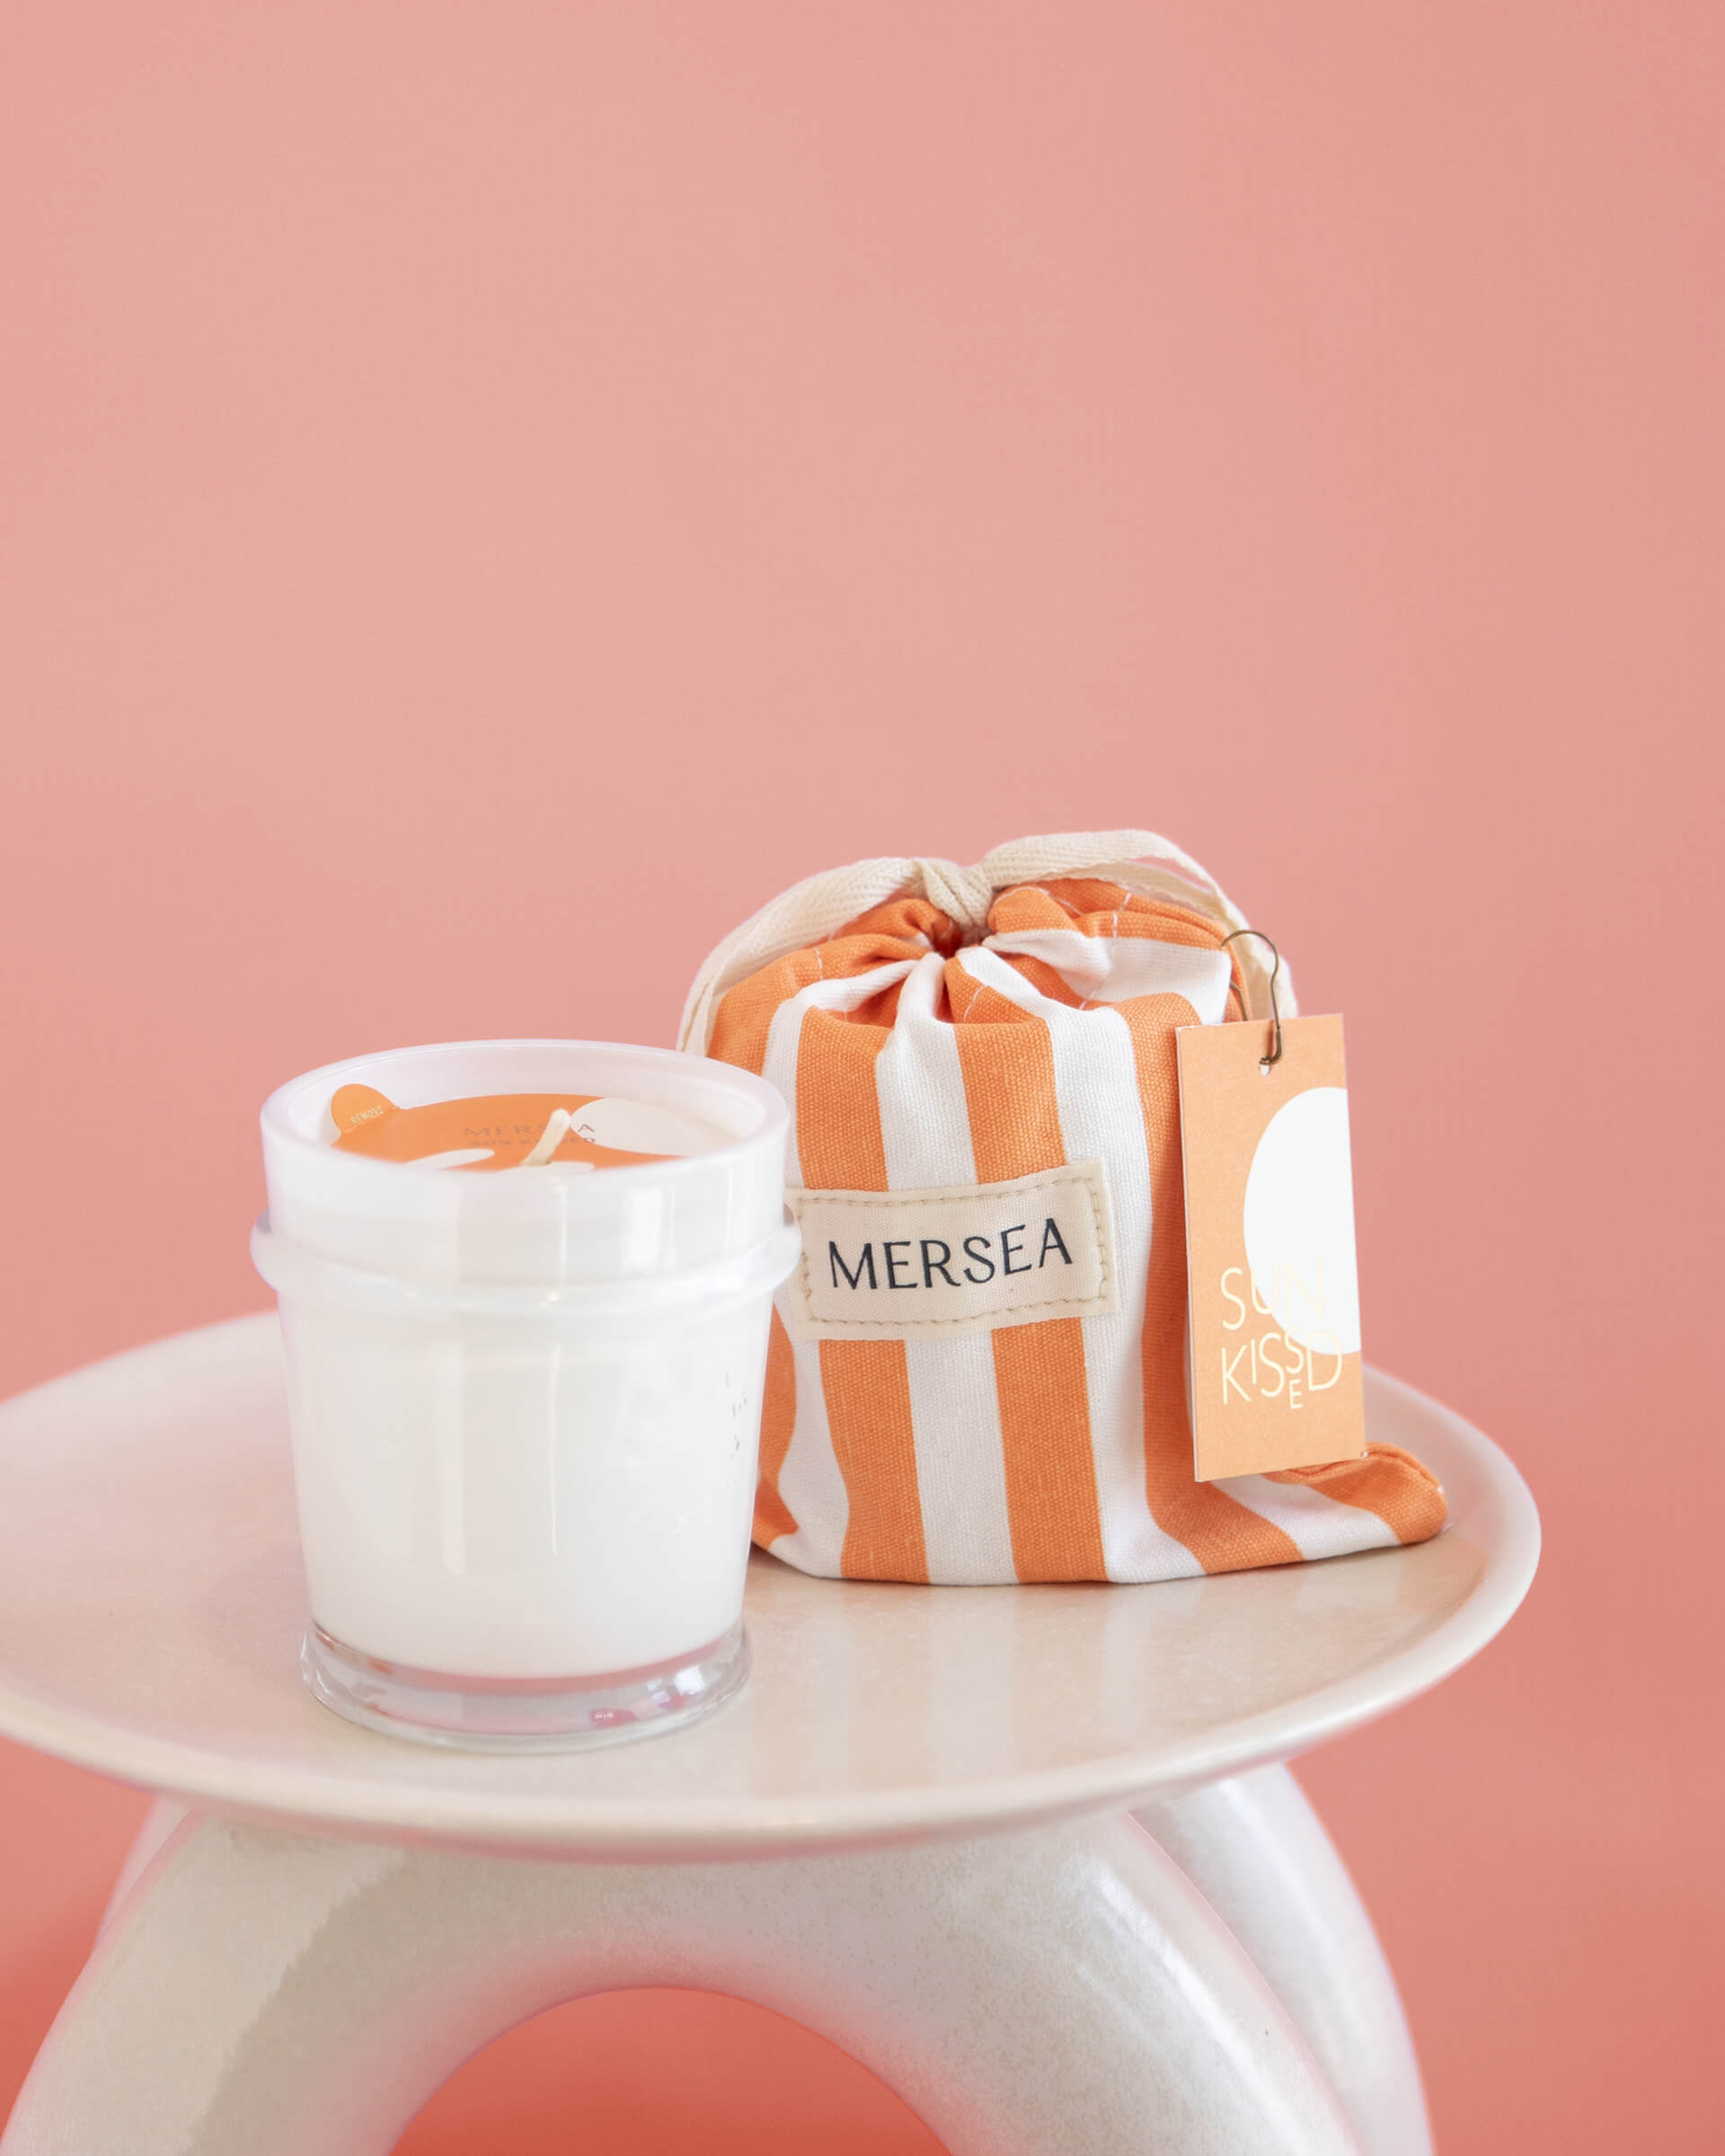 6.5 oz Sun Kissed sandbag candle in orange and white striped bag on a light red background